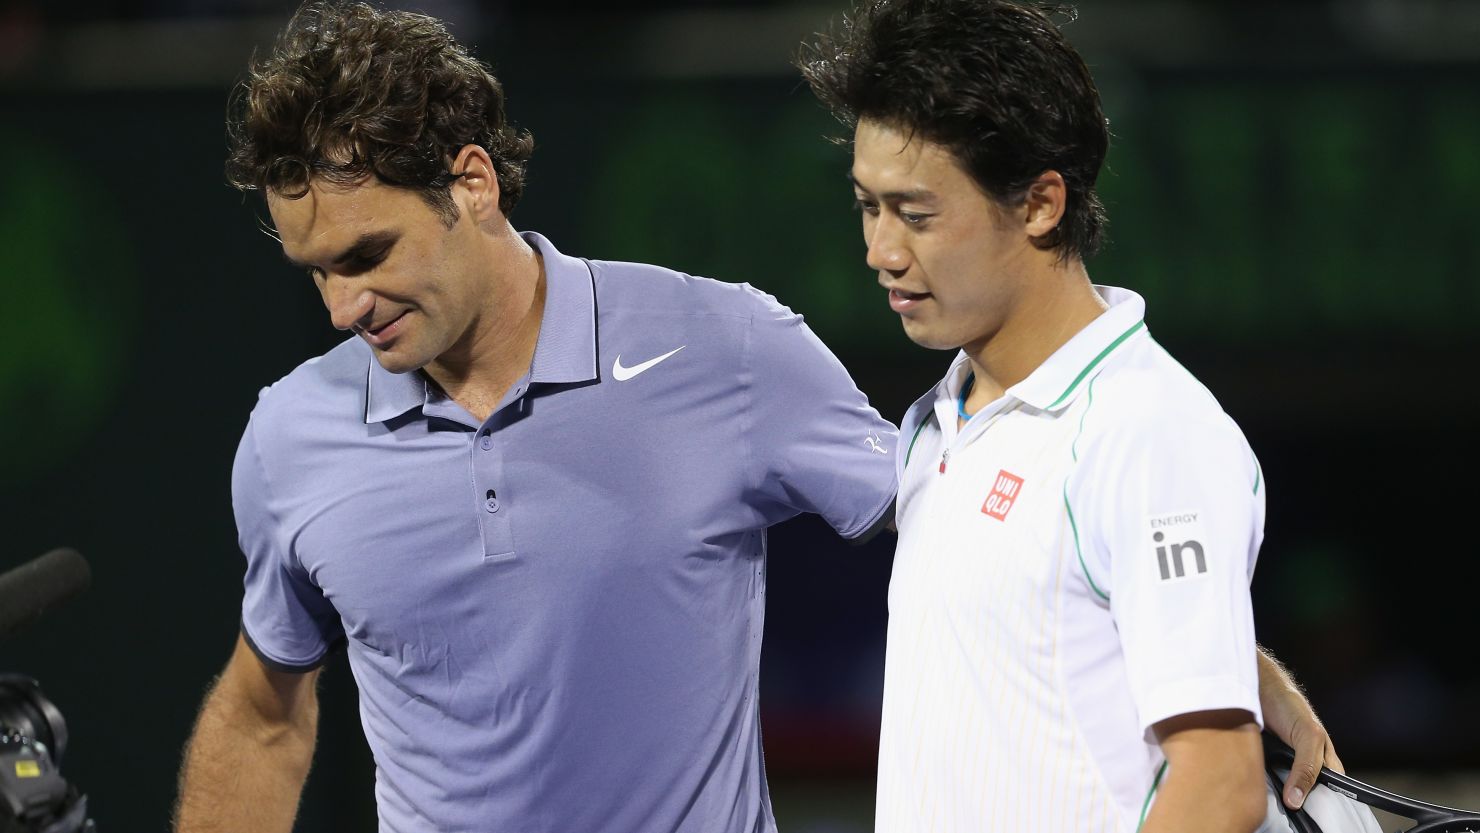 Roger Federer, left, lost to Kei Nishikori at the Miami Masters after leading by a set and break.  